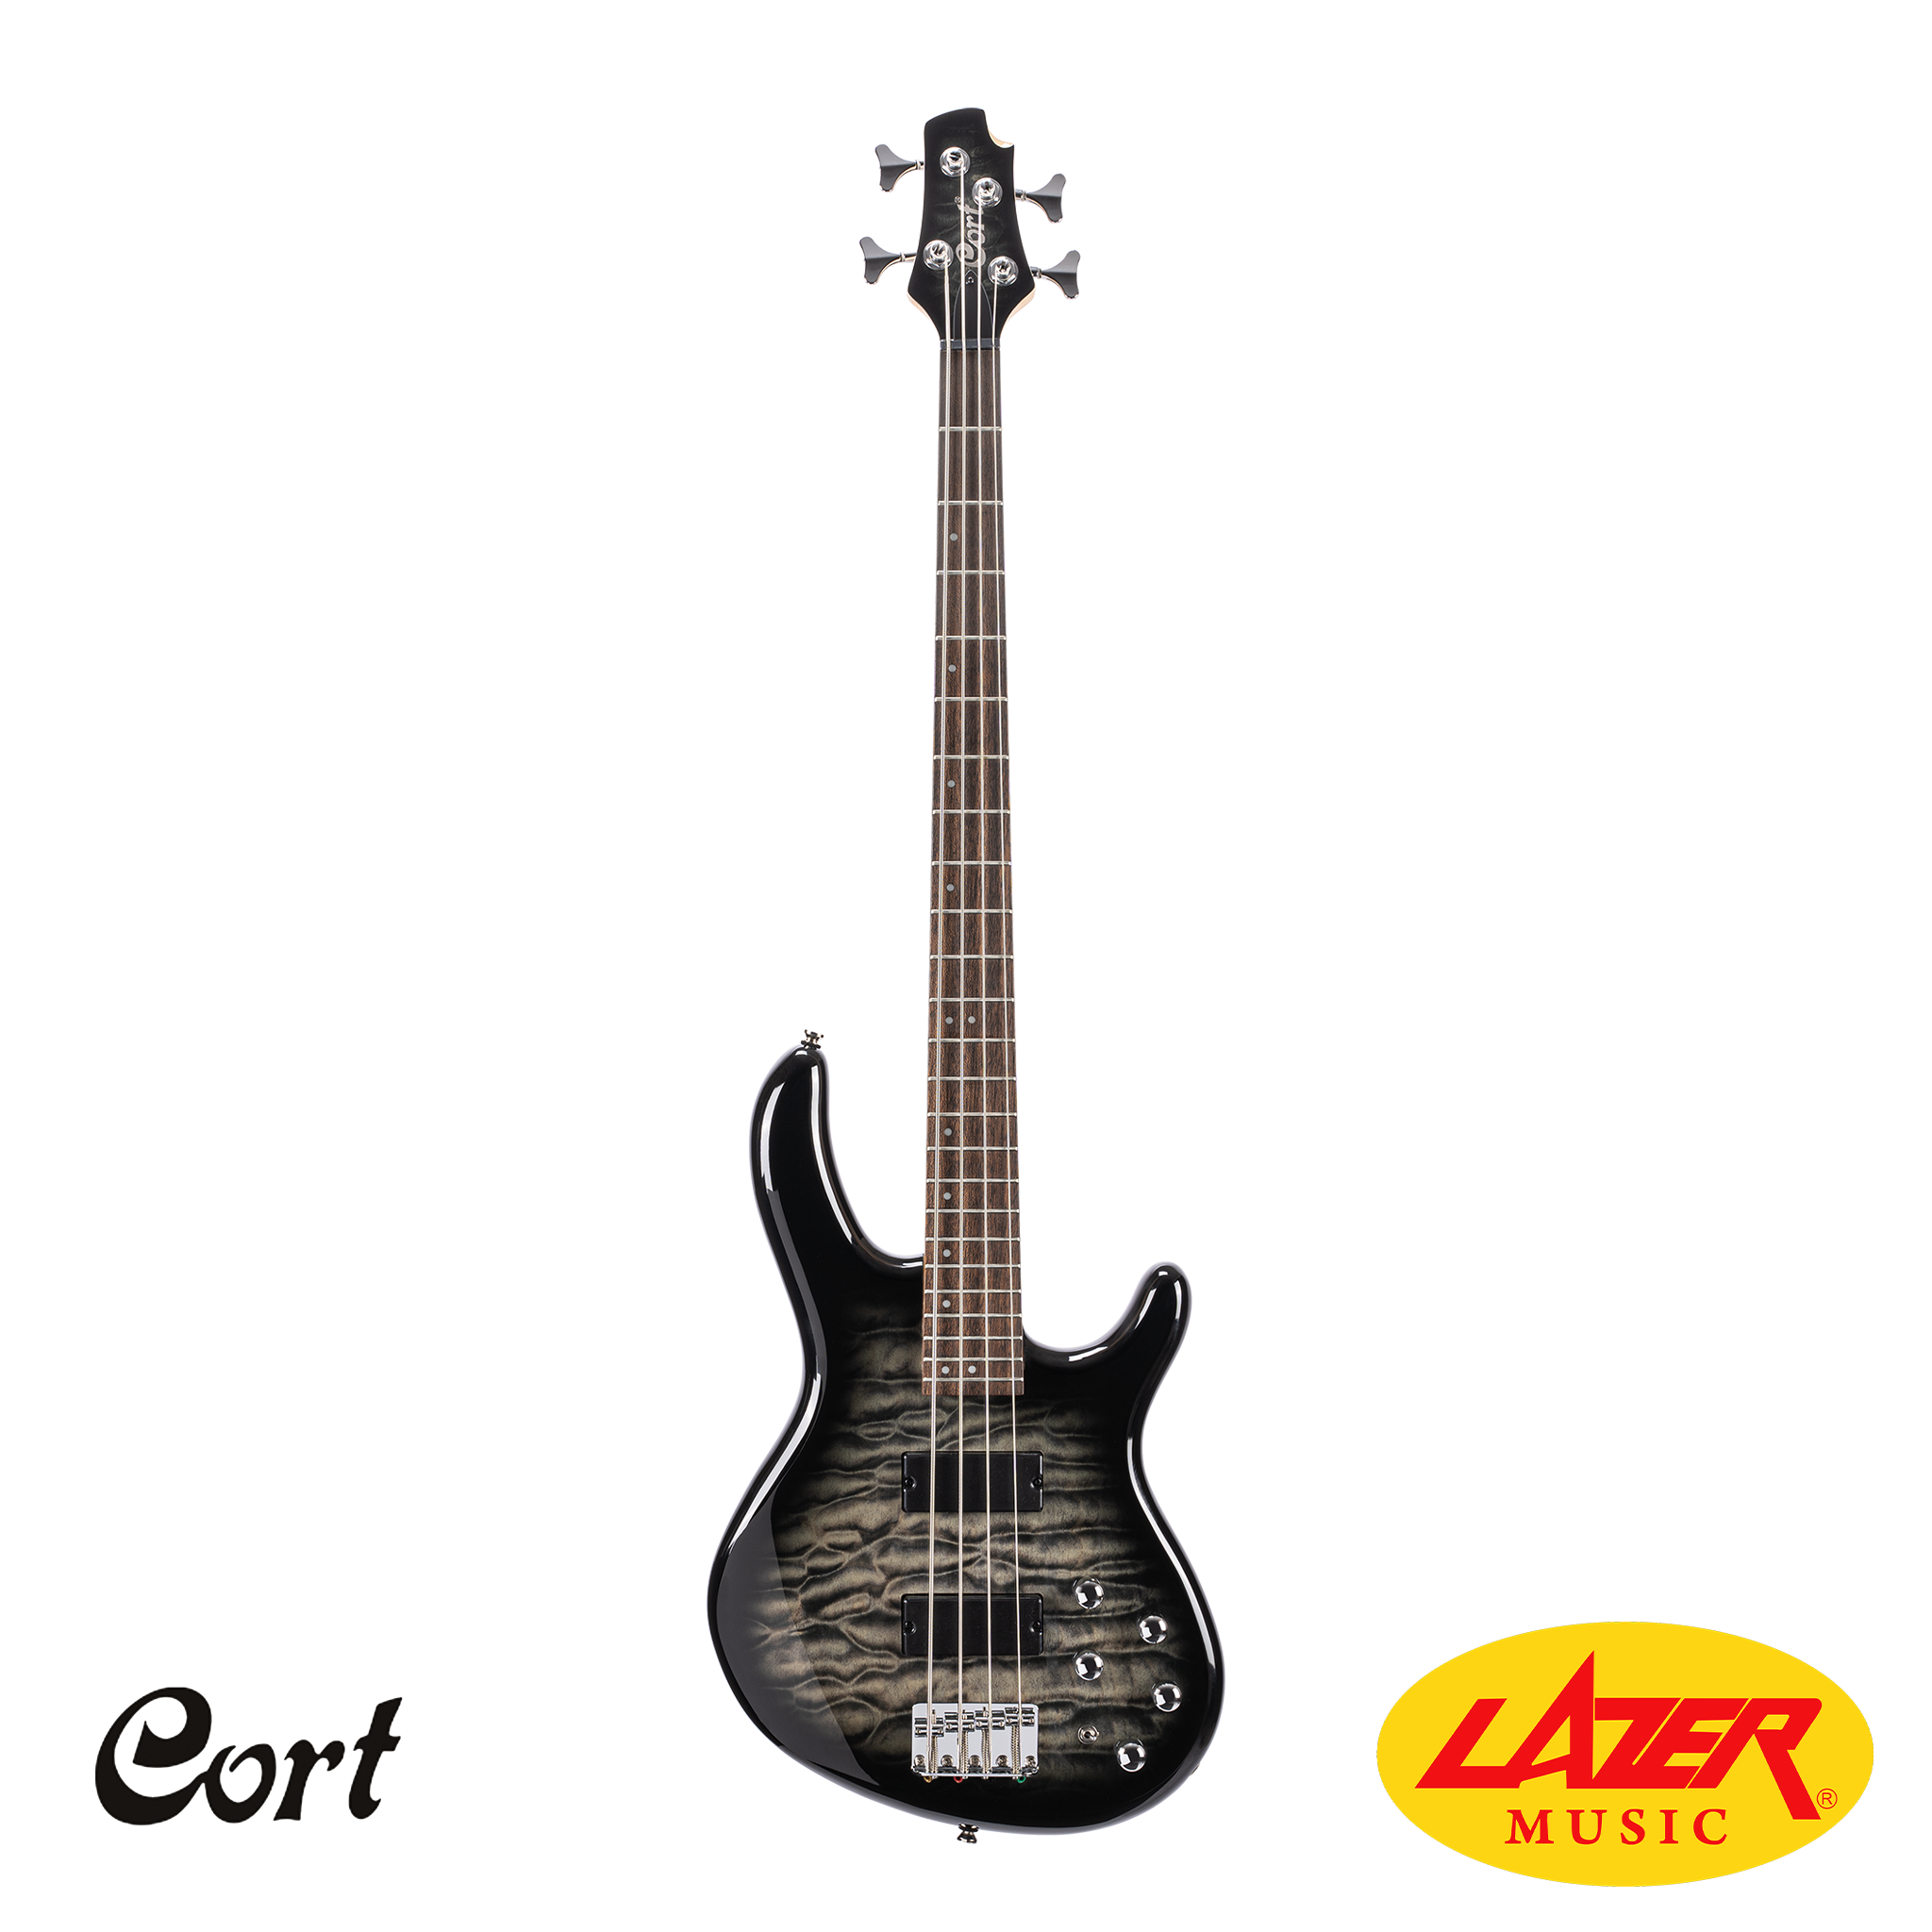 Cort DLX-PLUS Bass Guitar With Hard Maple Neck, Markbass EQ, and Bag